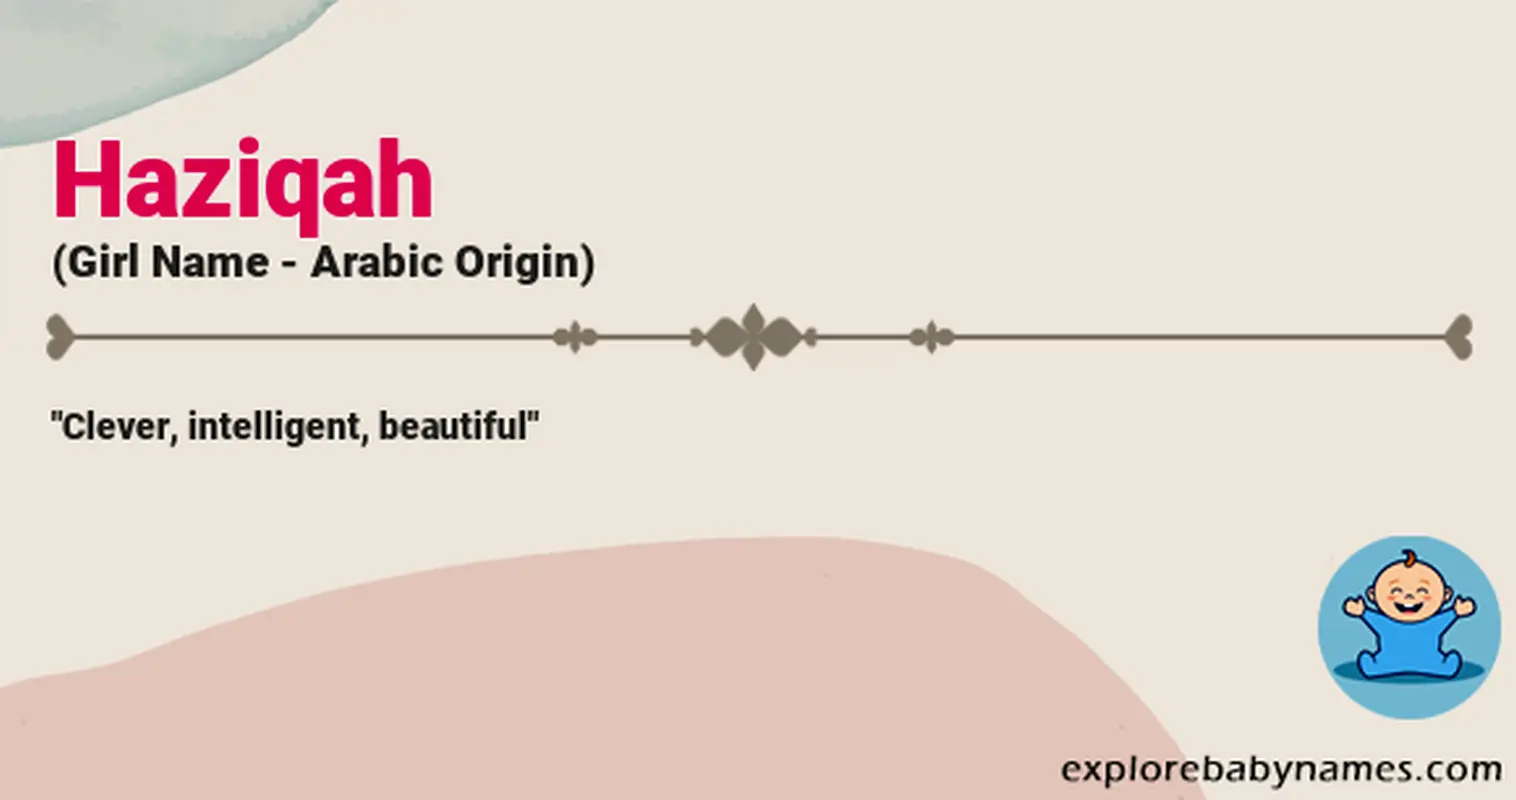 Meaning of Haziqah